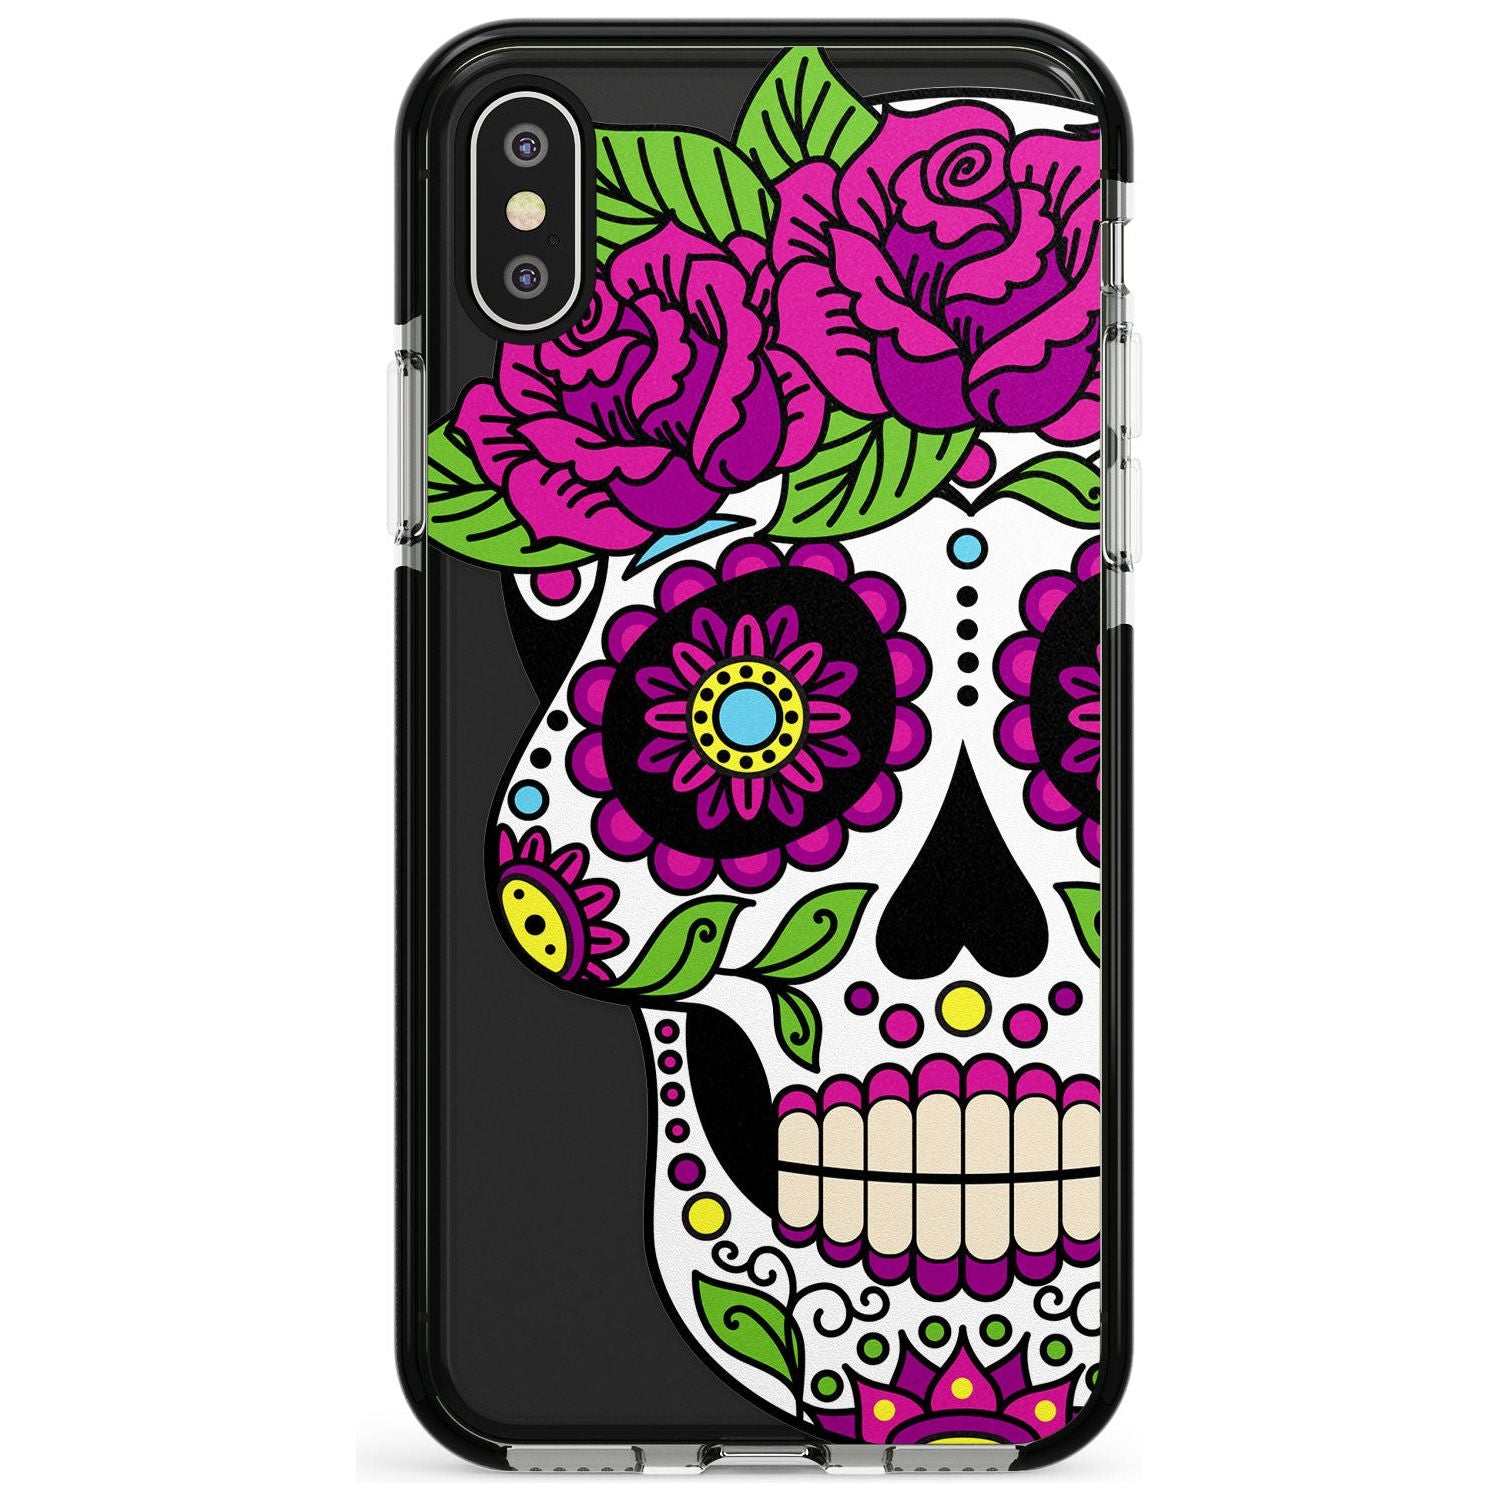 Purple Floral Sugar Skull Black Impact Phone Case for iPhone X XS Max XR